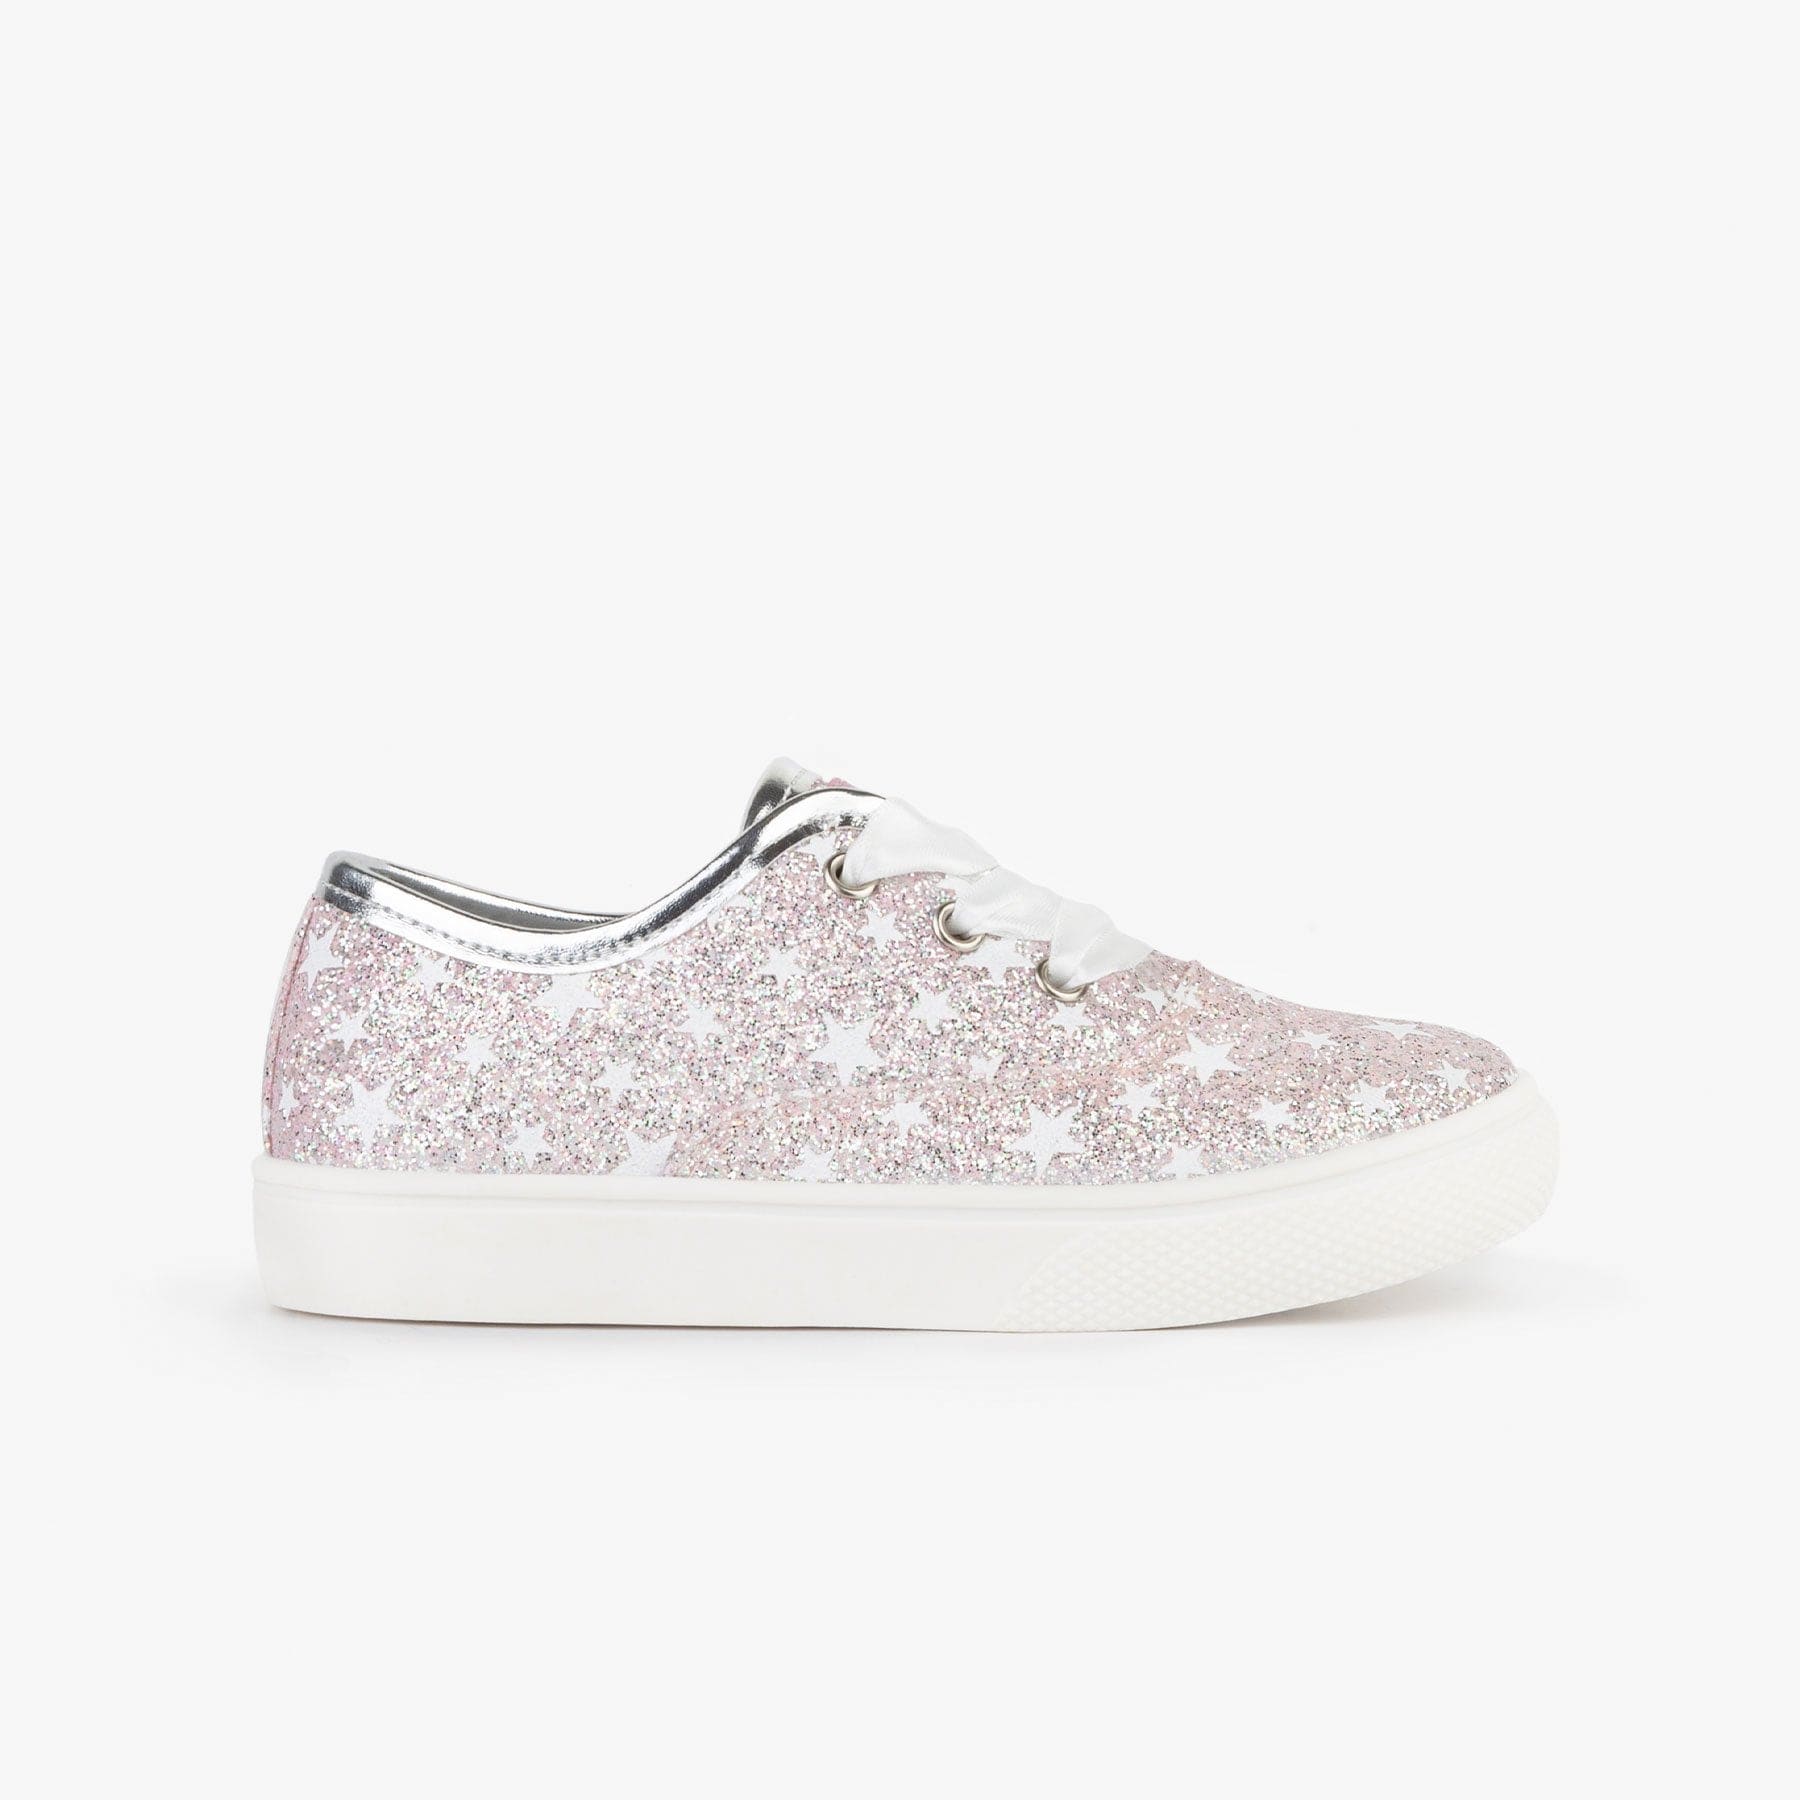 CONGUITOS Shoes Girl's Pink Stars Glitter Sneakers